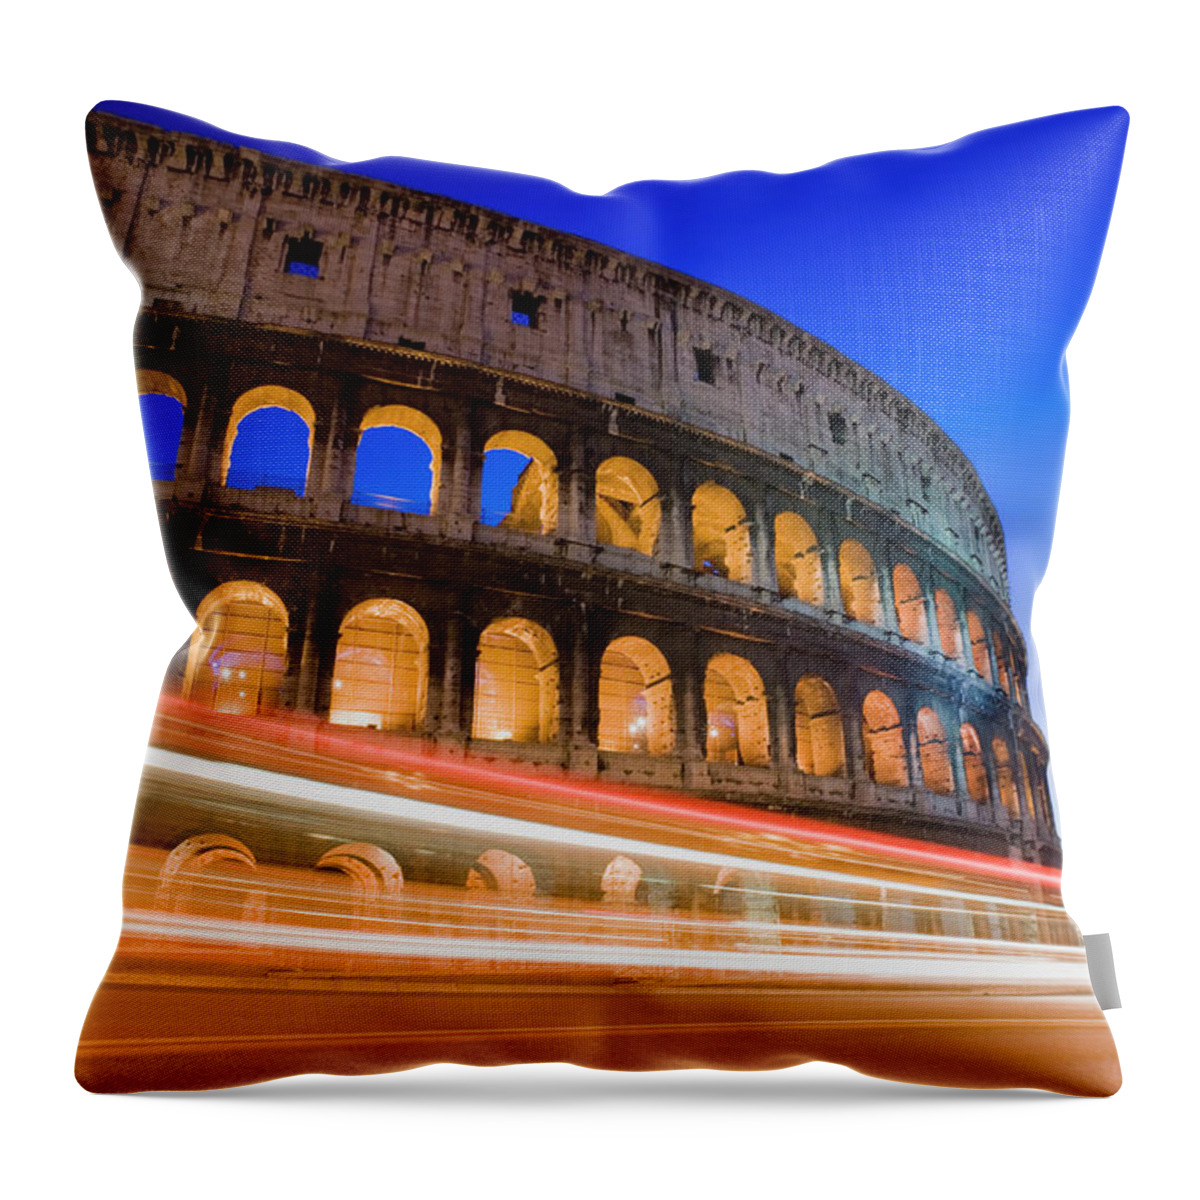 Architectural Feature Throw Pillow featuring the photograph The Colosseum In Rome Italy #2 by Deejpilot